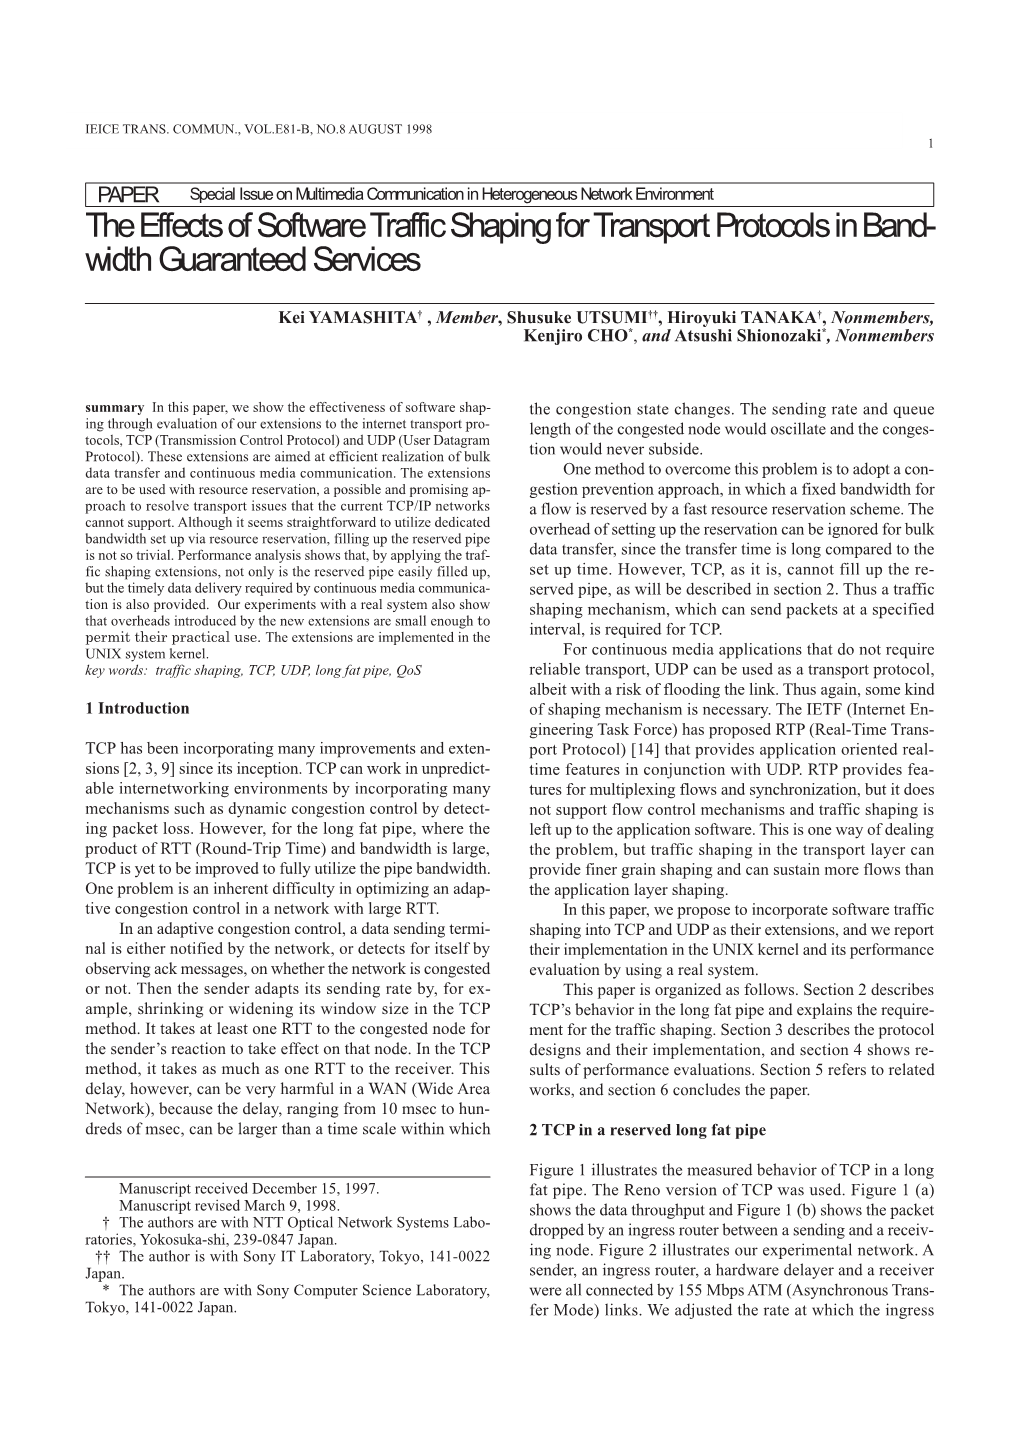 The Effects of Software Traffic Shaping for Transport Protocols in Band- Width Guaranteed Services